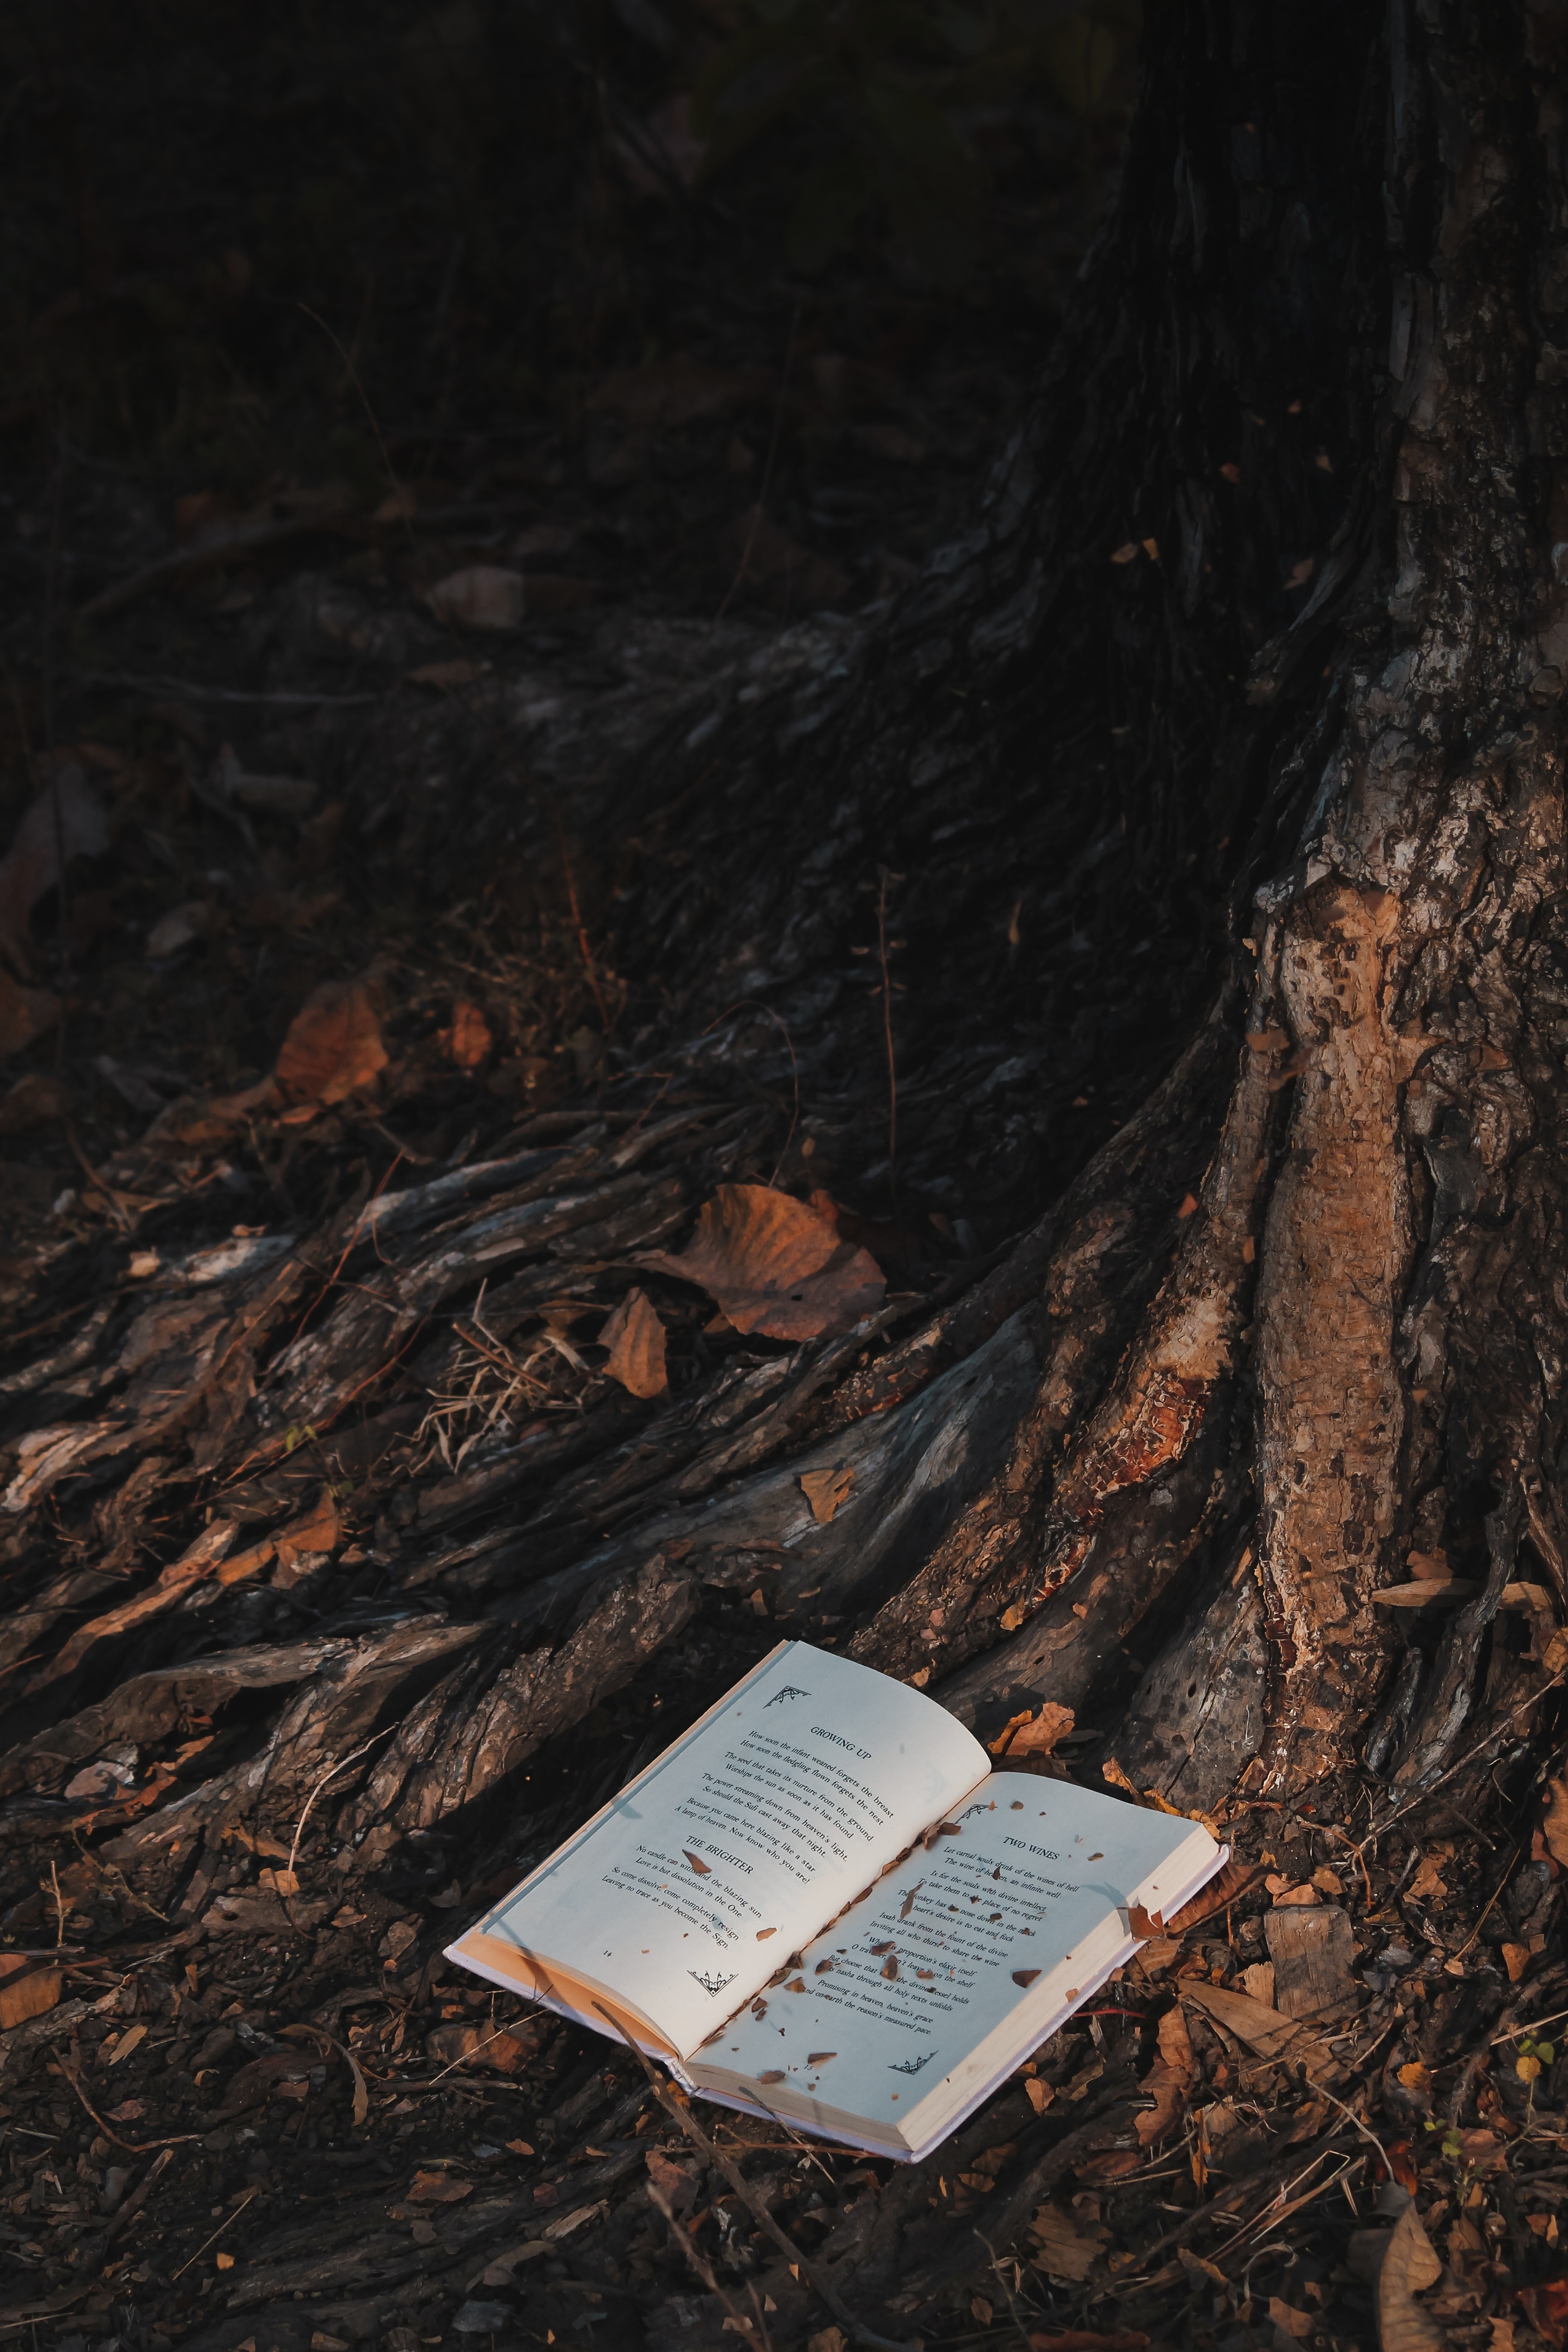 miscellanea, wood, forest, book, miscellaneous, tree cellphone